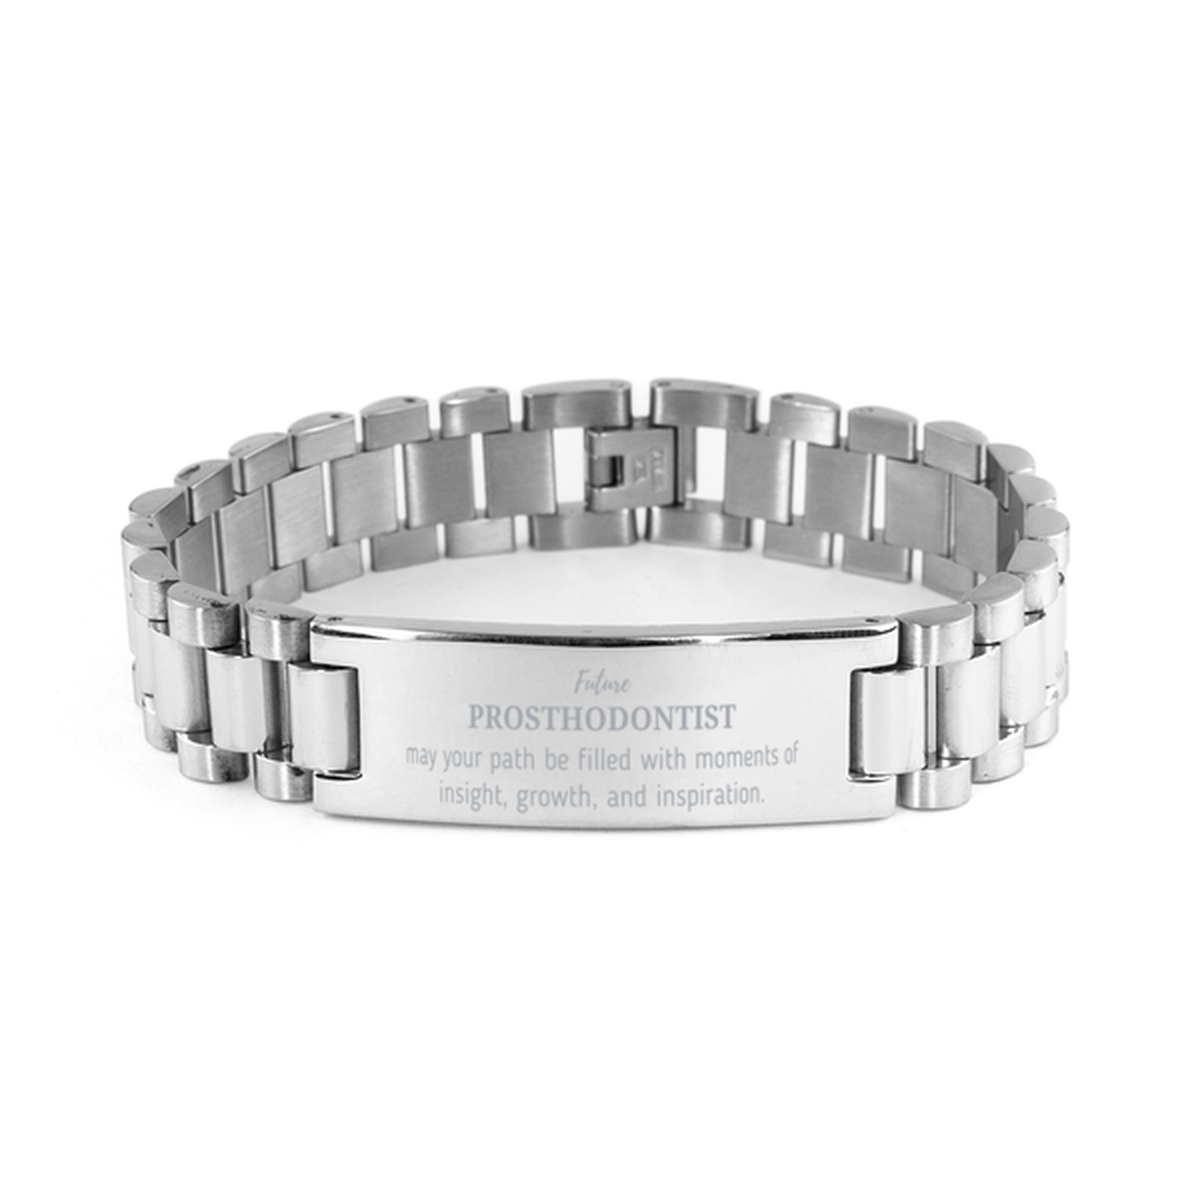 Future Prosthodontist Gifts, May your path be filled with moments of insight, Graduation Gifts for New Prosthodontist, Christmas Unique Ladder Stainless Steel Bracelet For Men, Women, Friends